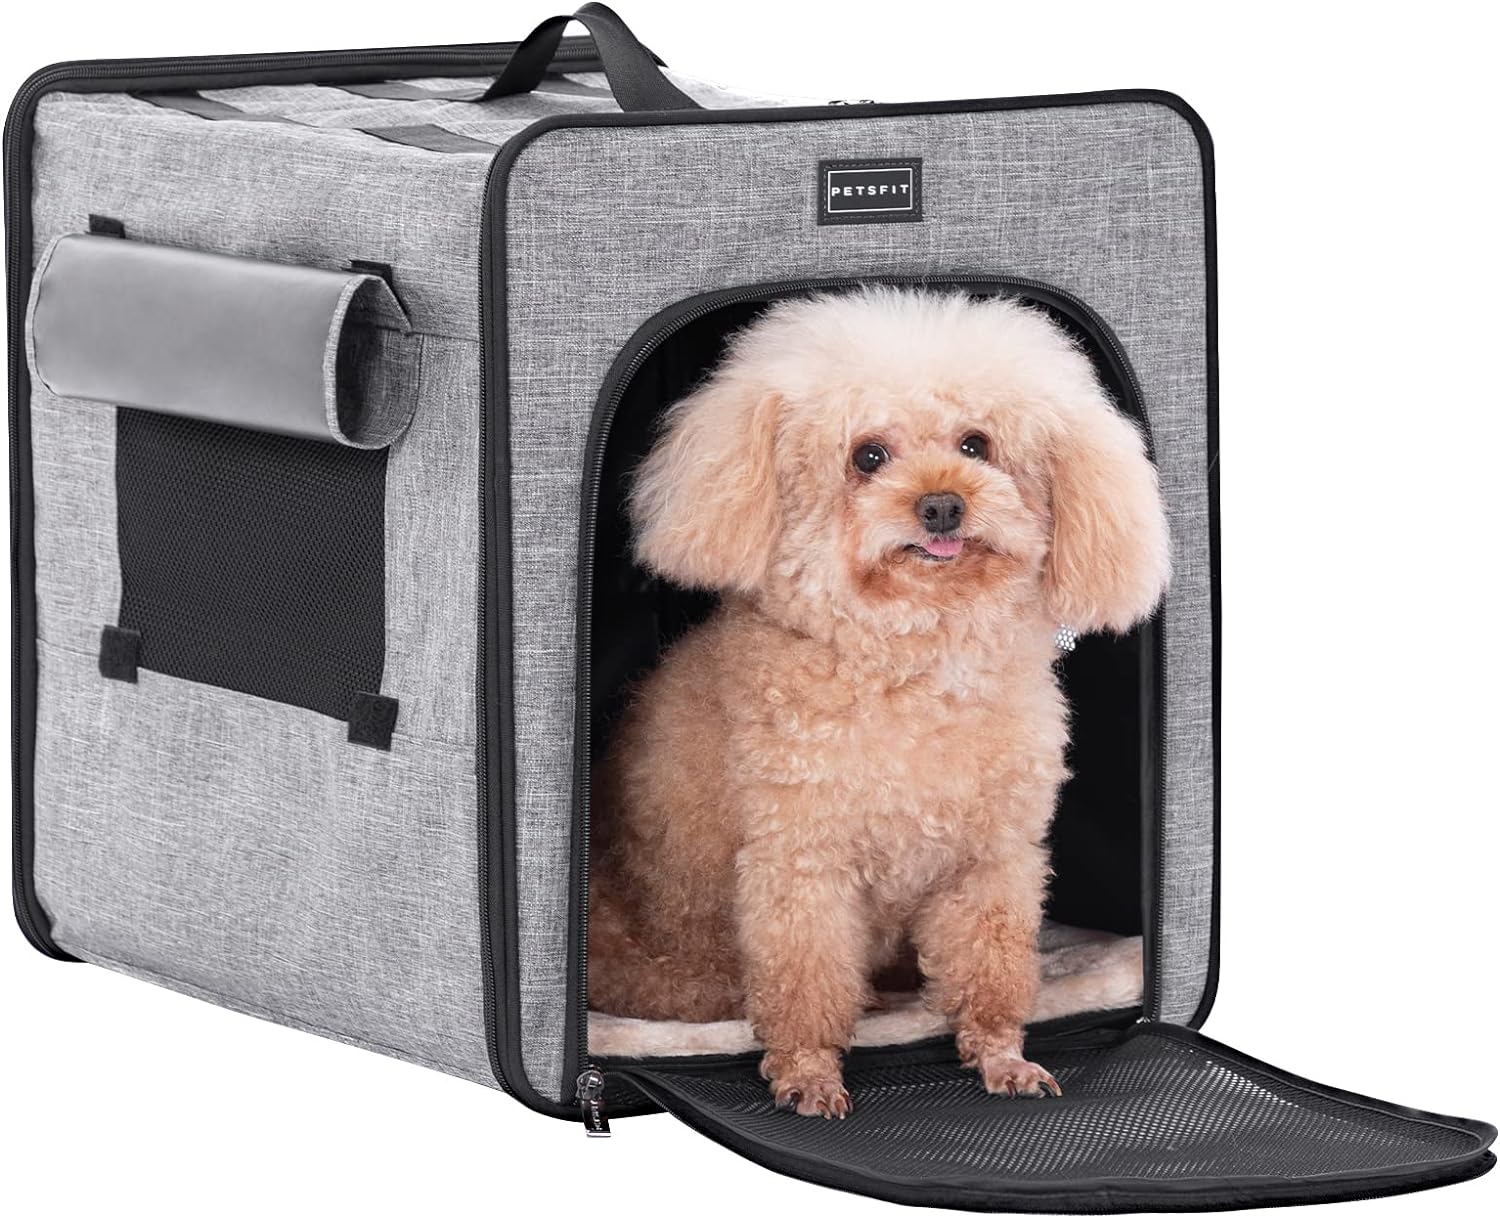 Best Dog Crates For Small Dogs